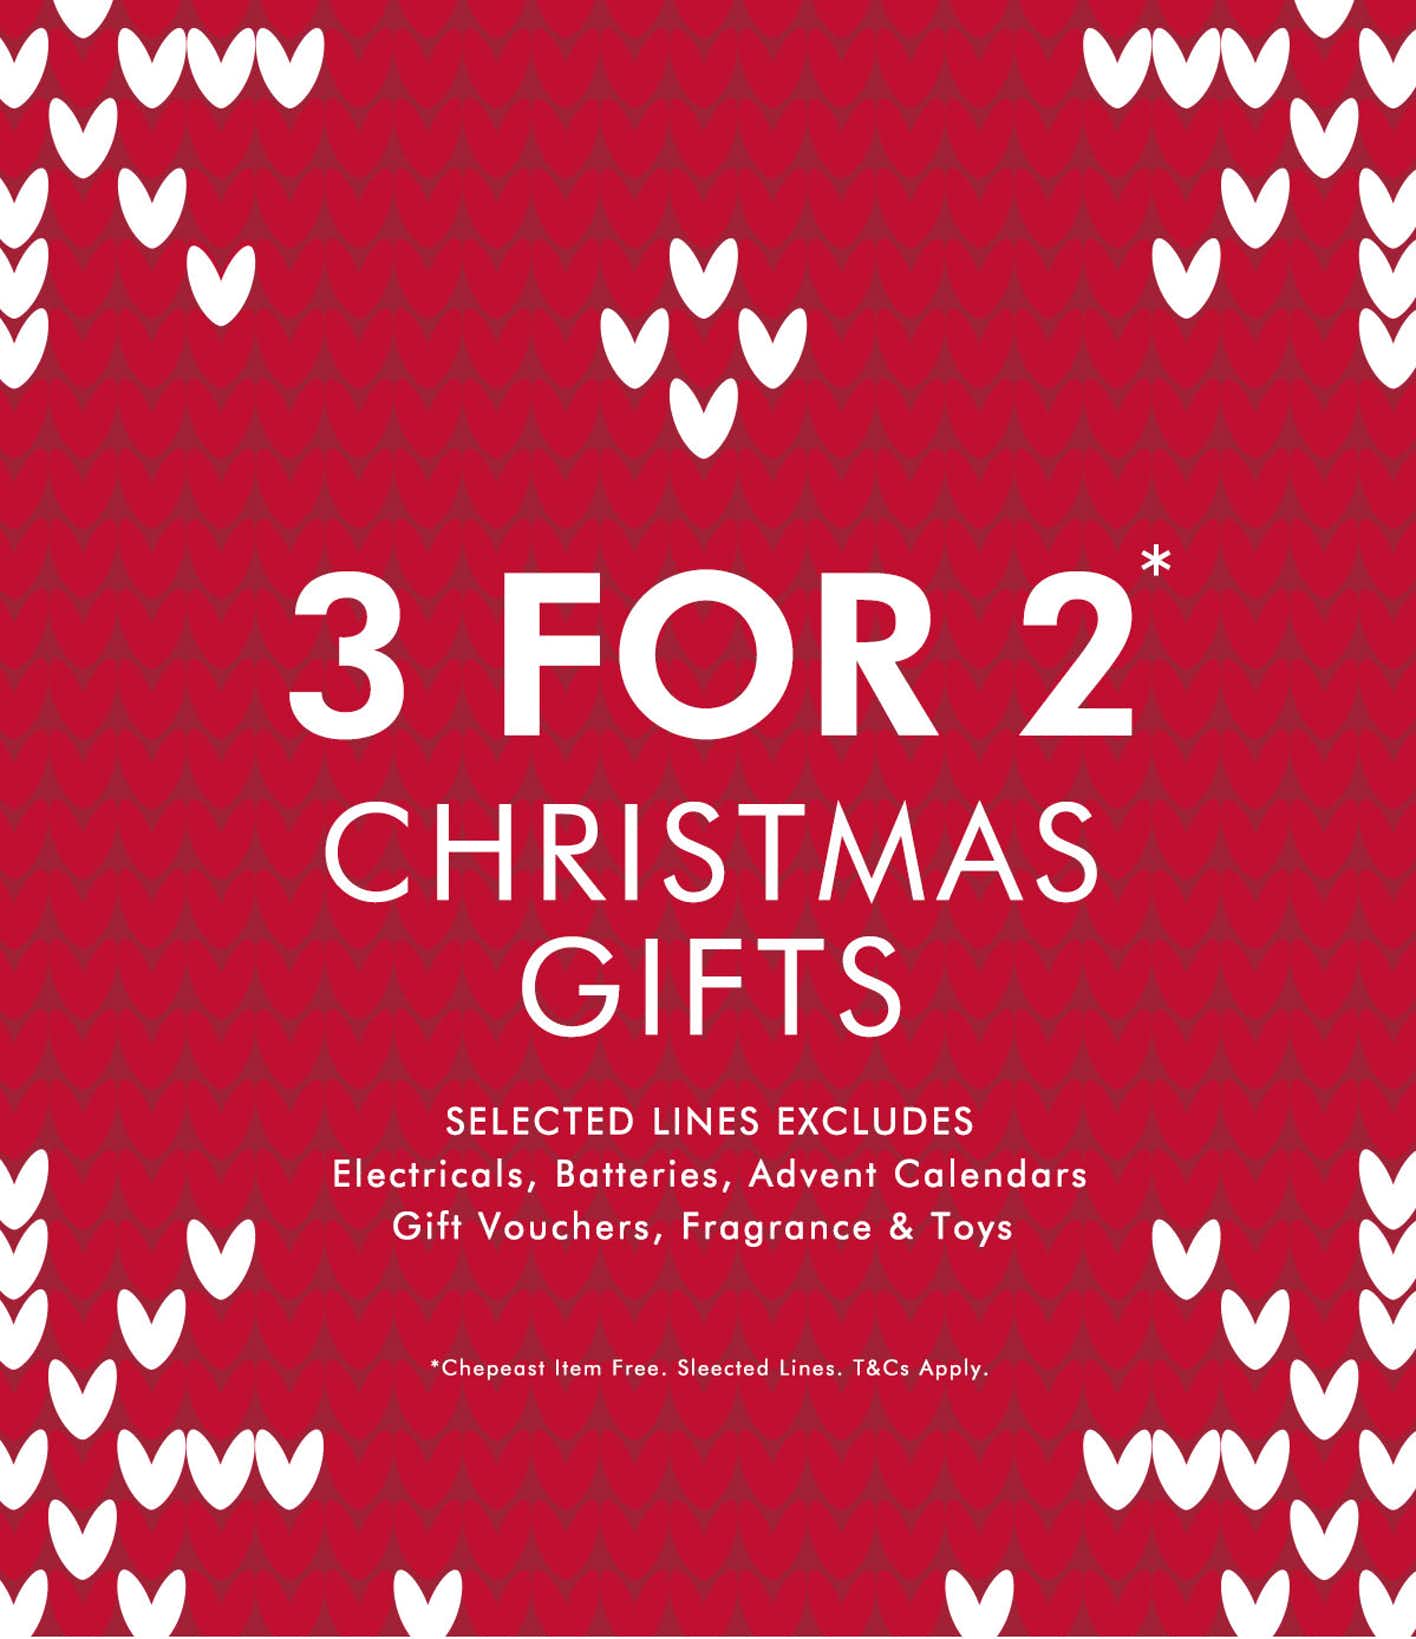 3 for 2 Christmas Gifts